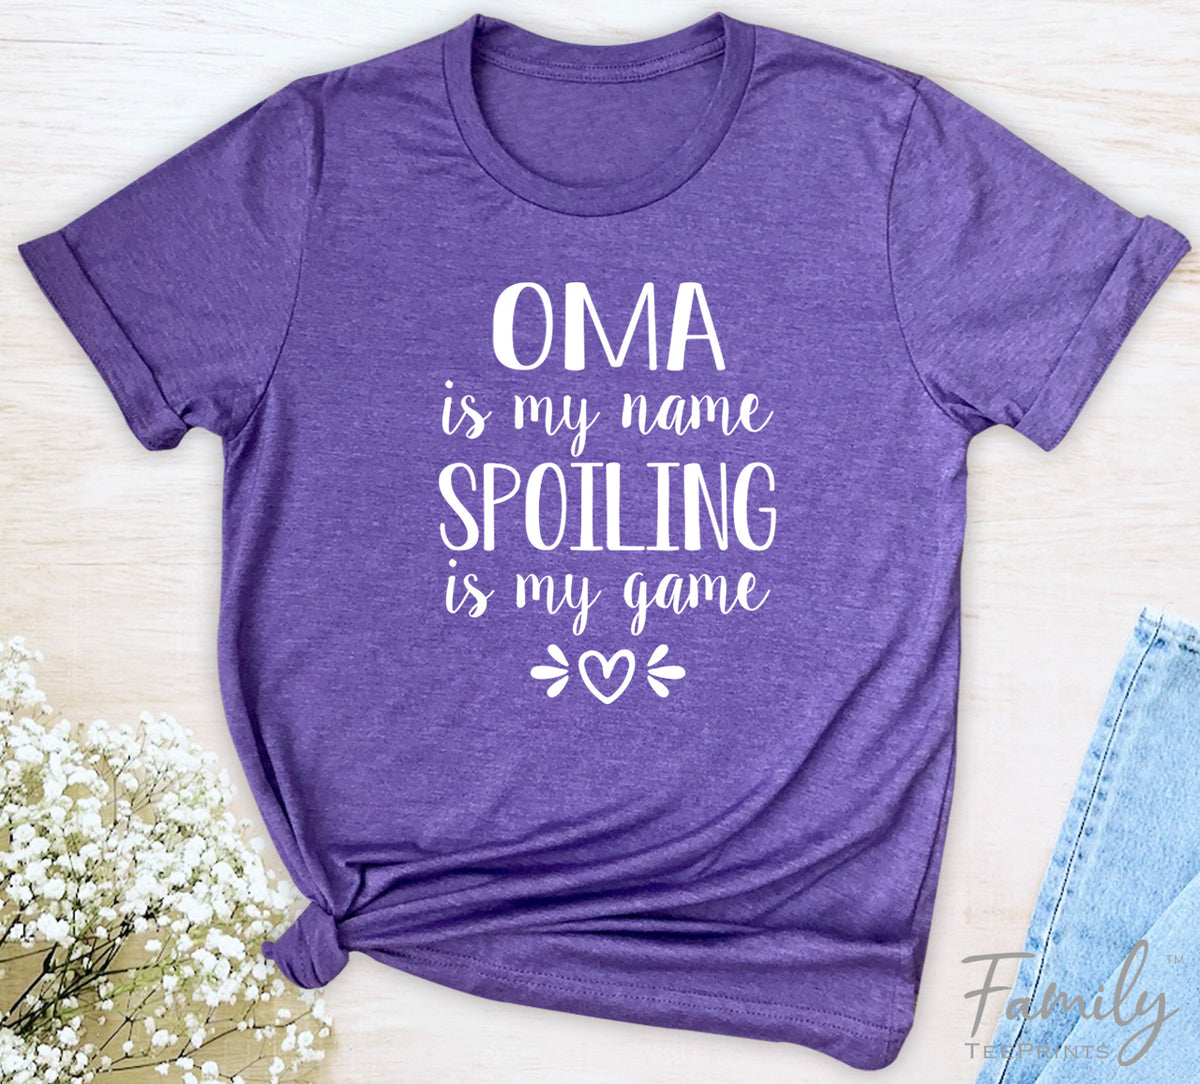 Oma Is My Name Spoiling Is My Game - Unisex T-shirt - Oma Shirt - Gift For Oma - familyteeprints